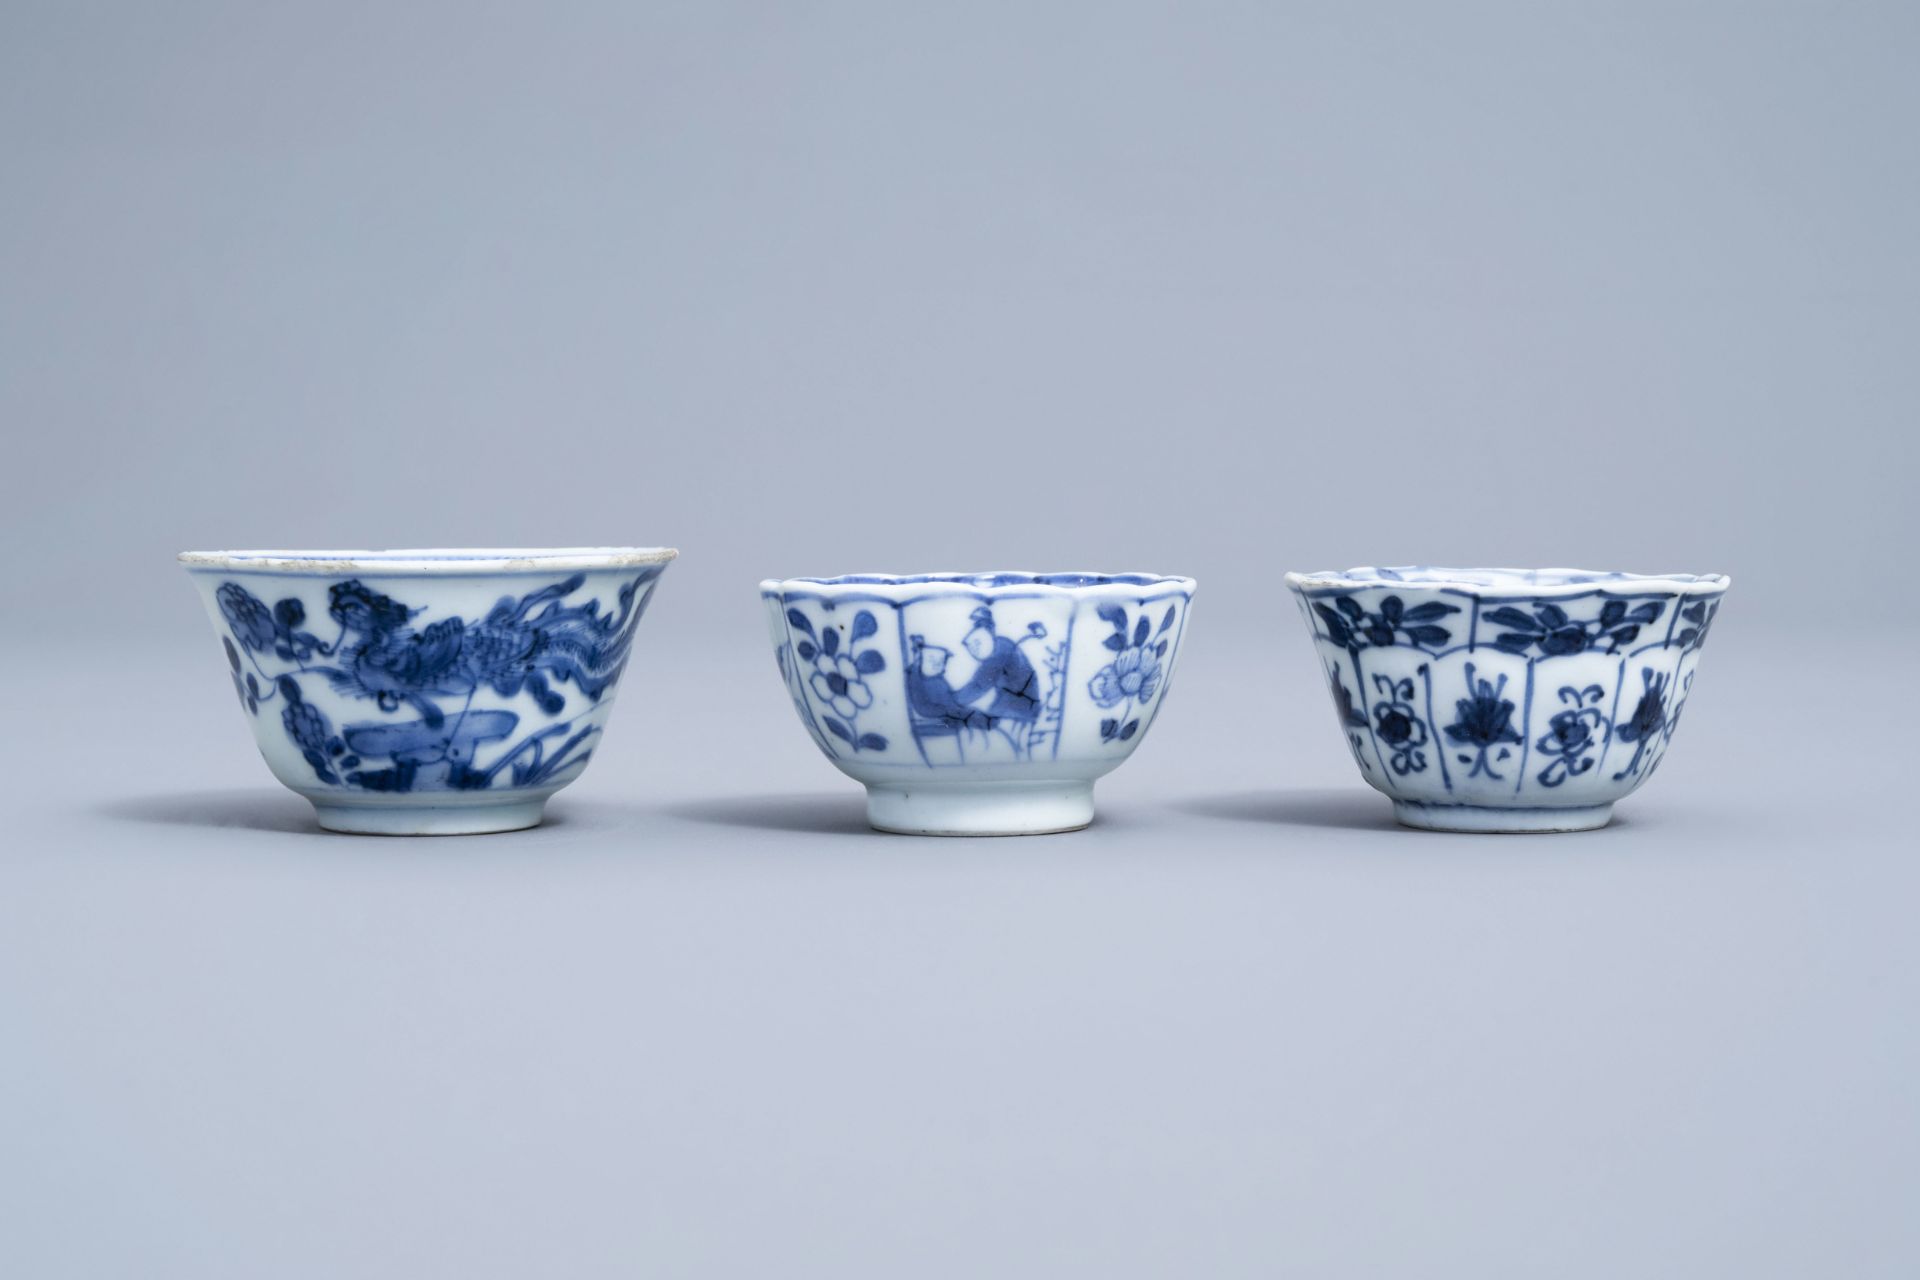 A varied collection of Chinese blue and white porcelain, 18th C. and later - Image 32 of 54